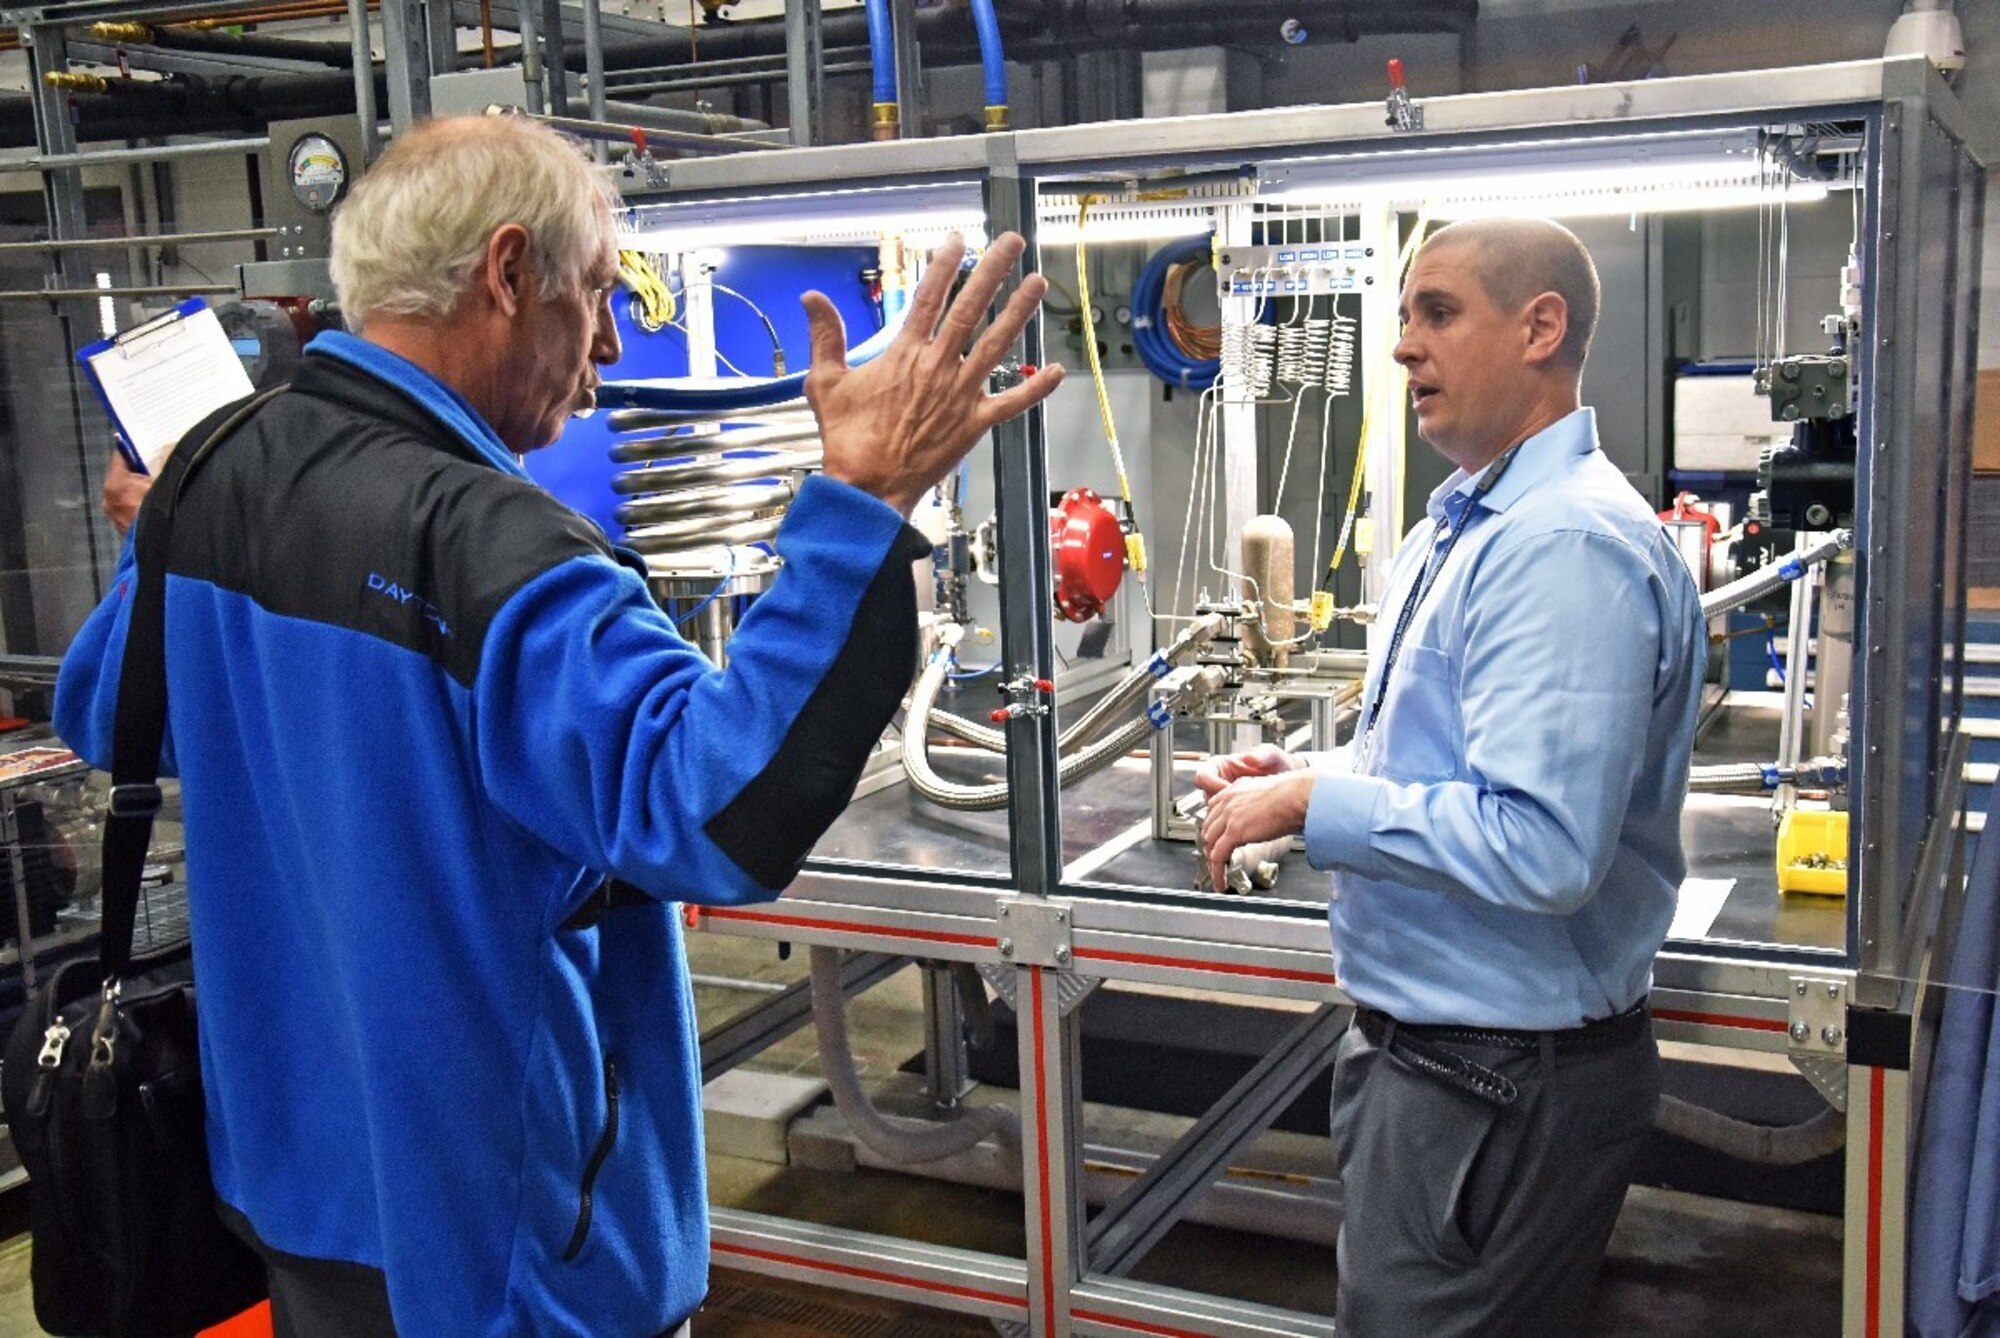 Marvin Gale, MAMLS Program Manager (left) and Grady Marcum, AFRL chemical engineer, discuss the new heat exchange tester during the capability’s kick-off tour, held Nov. 6. (U.S. Air Force Photo/Spencer Deer)